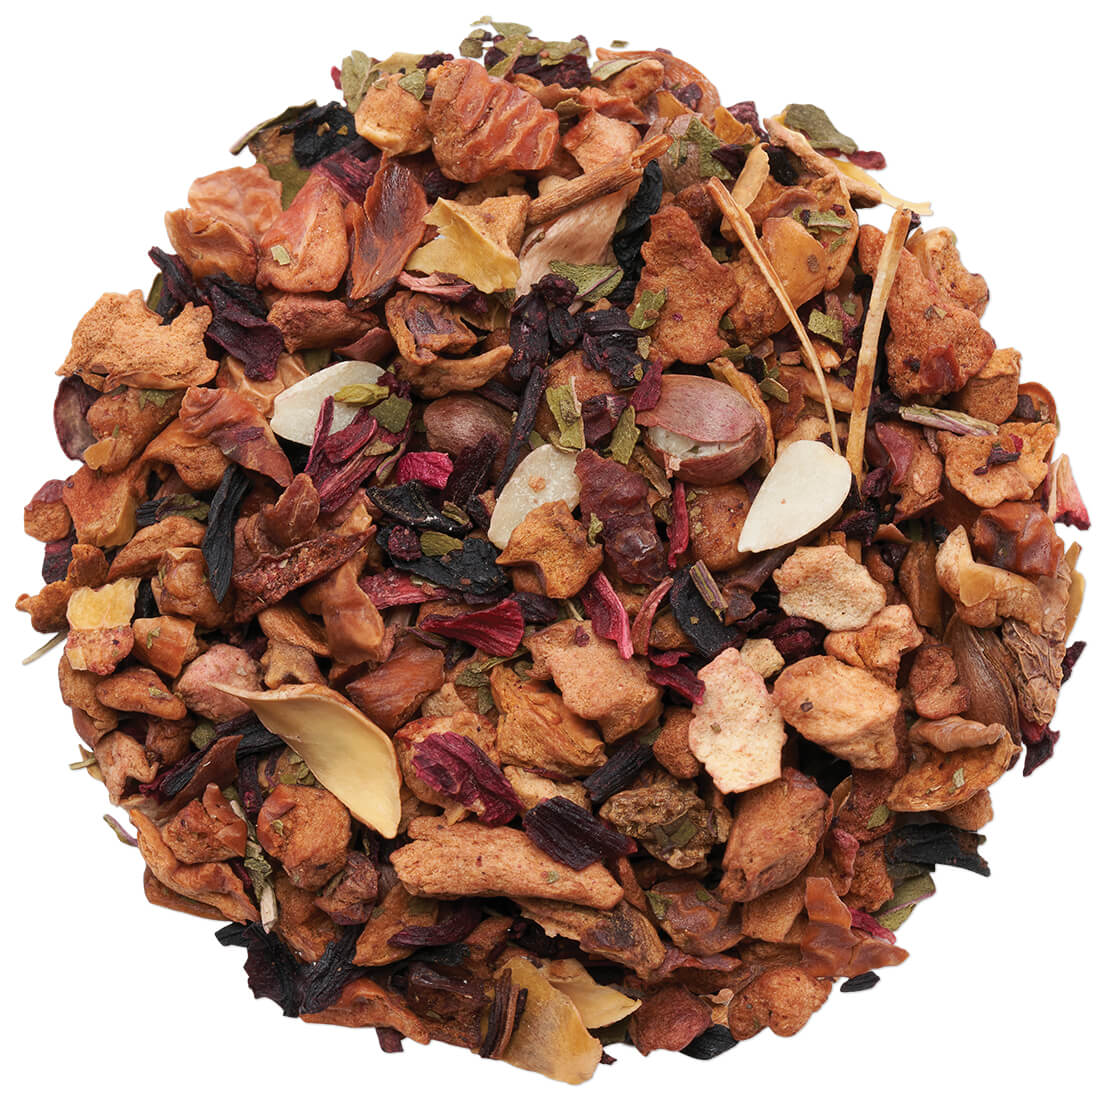 Premium Photo  Dried rose petals pure organic flower and aromatic incense  for herbal tea creating natural sachets